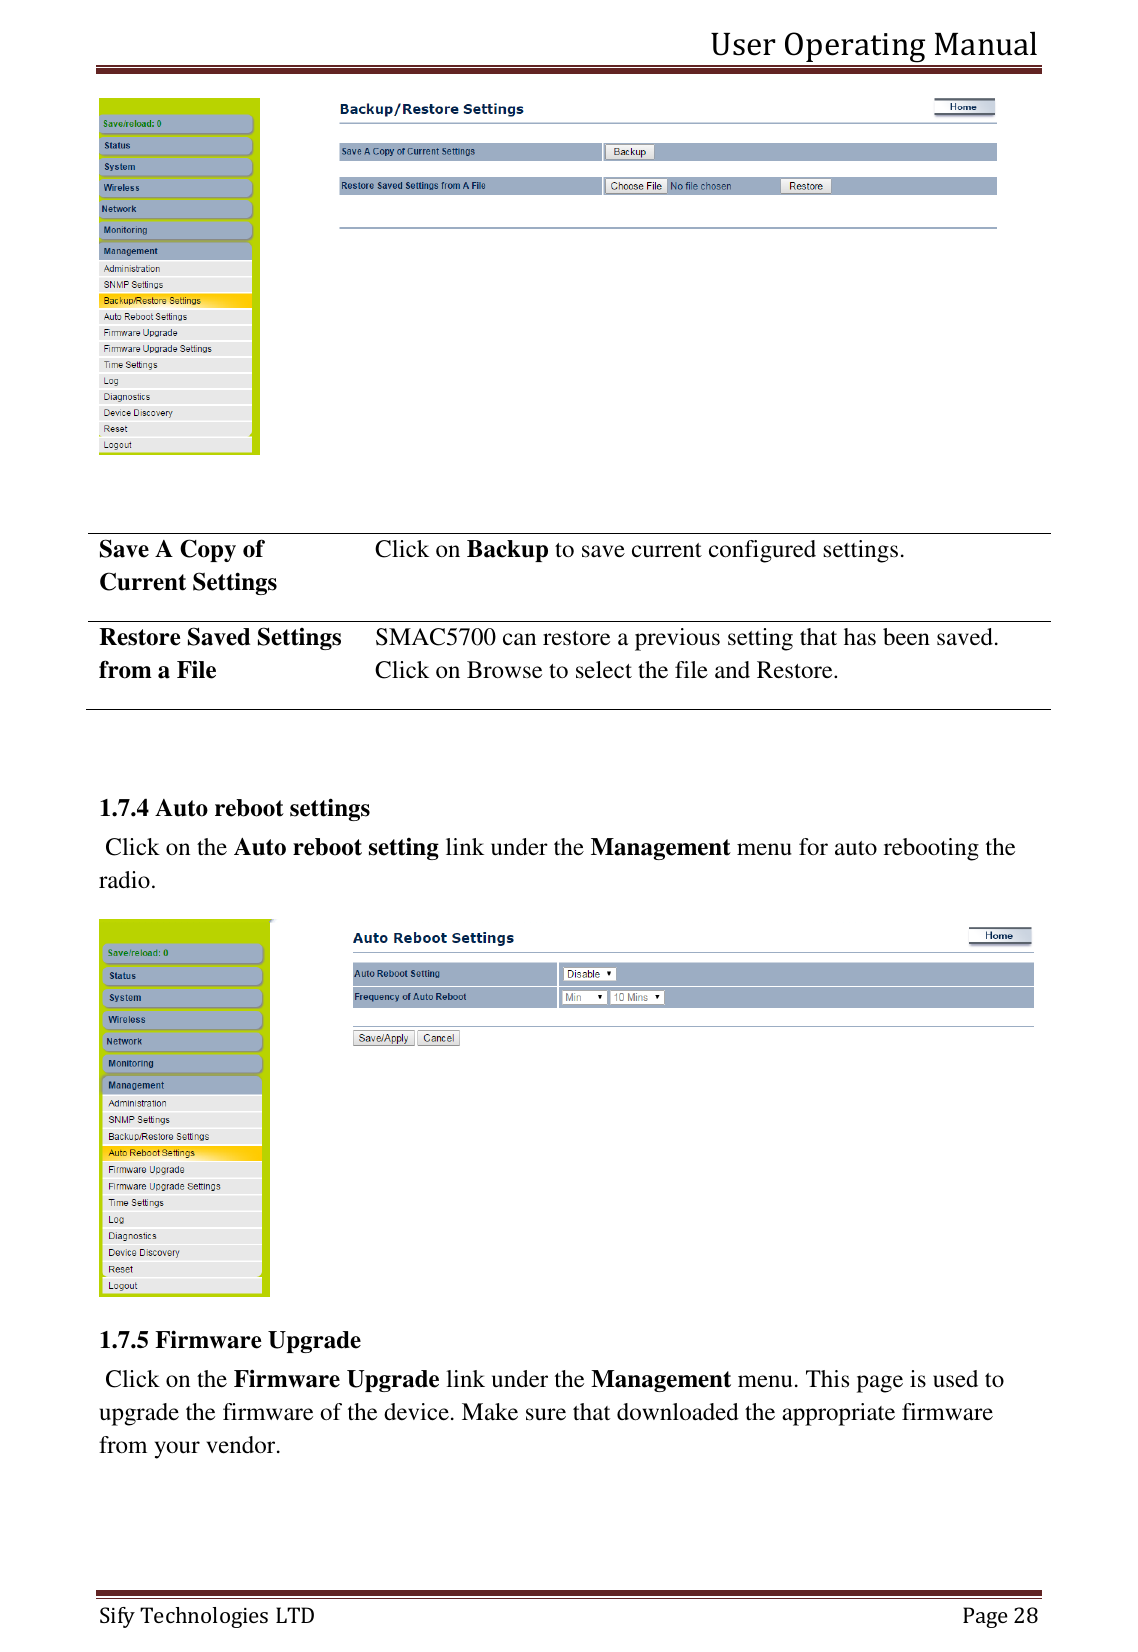 User Operating Manual   Sify Technologies LTD   Page 28   Save A Copy of Current Settings Click on Backup to save current configured settings. Restore Saved Settings from a File SMAC5700 can restore a previous setting that has been saved. Click on Browse to select the file and Restore.  1.7.4 Auto reboot settings  Click on the Auto reboot setting link under the Management menu for auto rebooting the radio.   1.7.5 Firmware Upgrade  Click on the Firmware Upgrade link under the Management menu. This page is used to upgrade the firmware of the device. Make sure that downloaded the appropriate firmware from your vendor.  